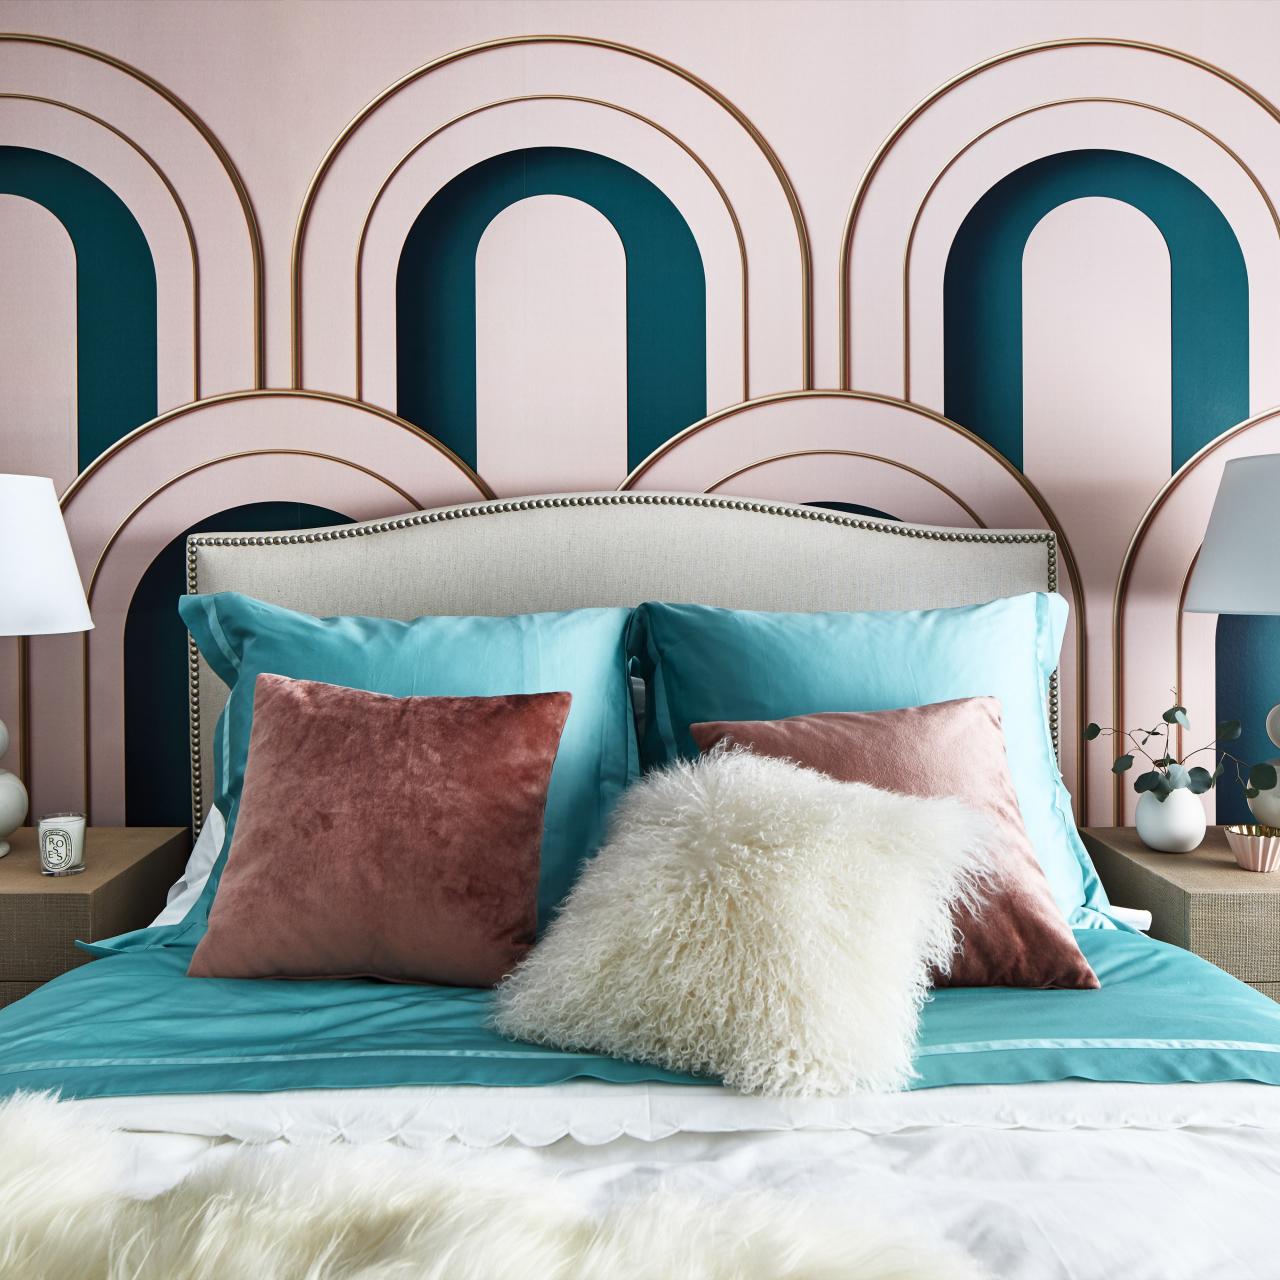 Where To Buy Art Deco-Inspired Furniture And Decor Online On A Budget